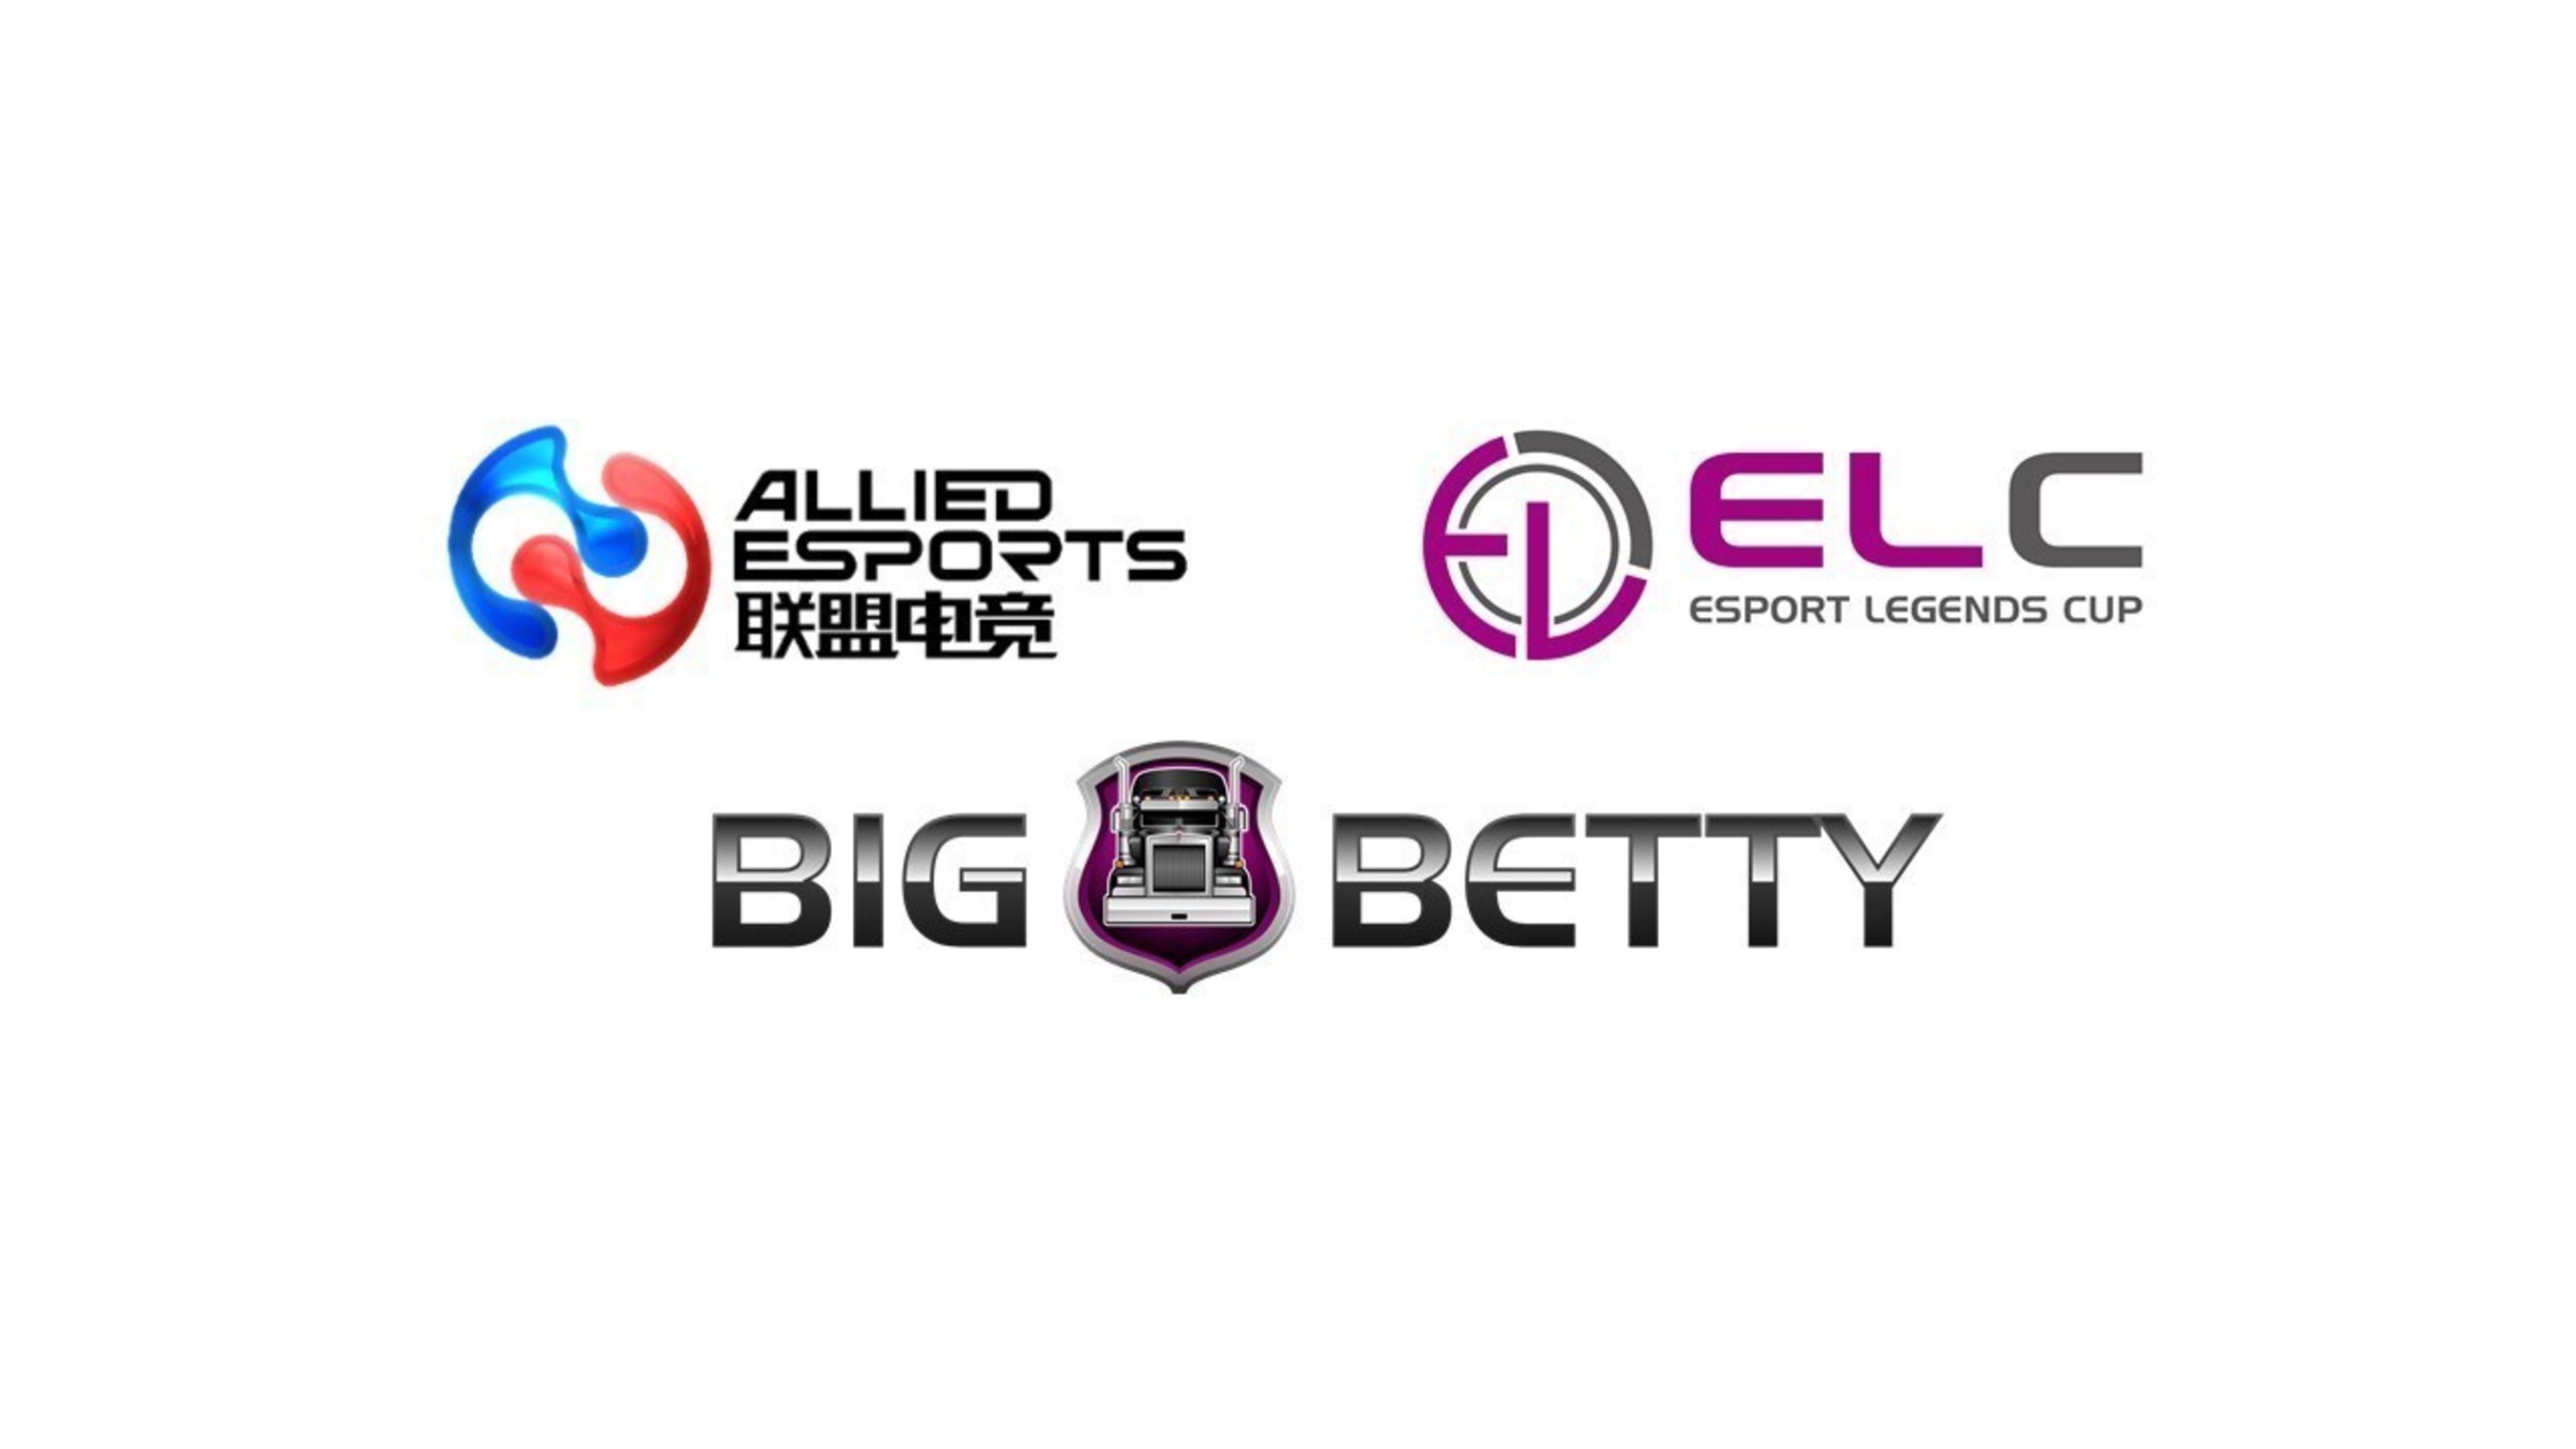 Allied eSports, ELC Gaming and Big Betty logo